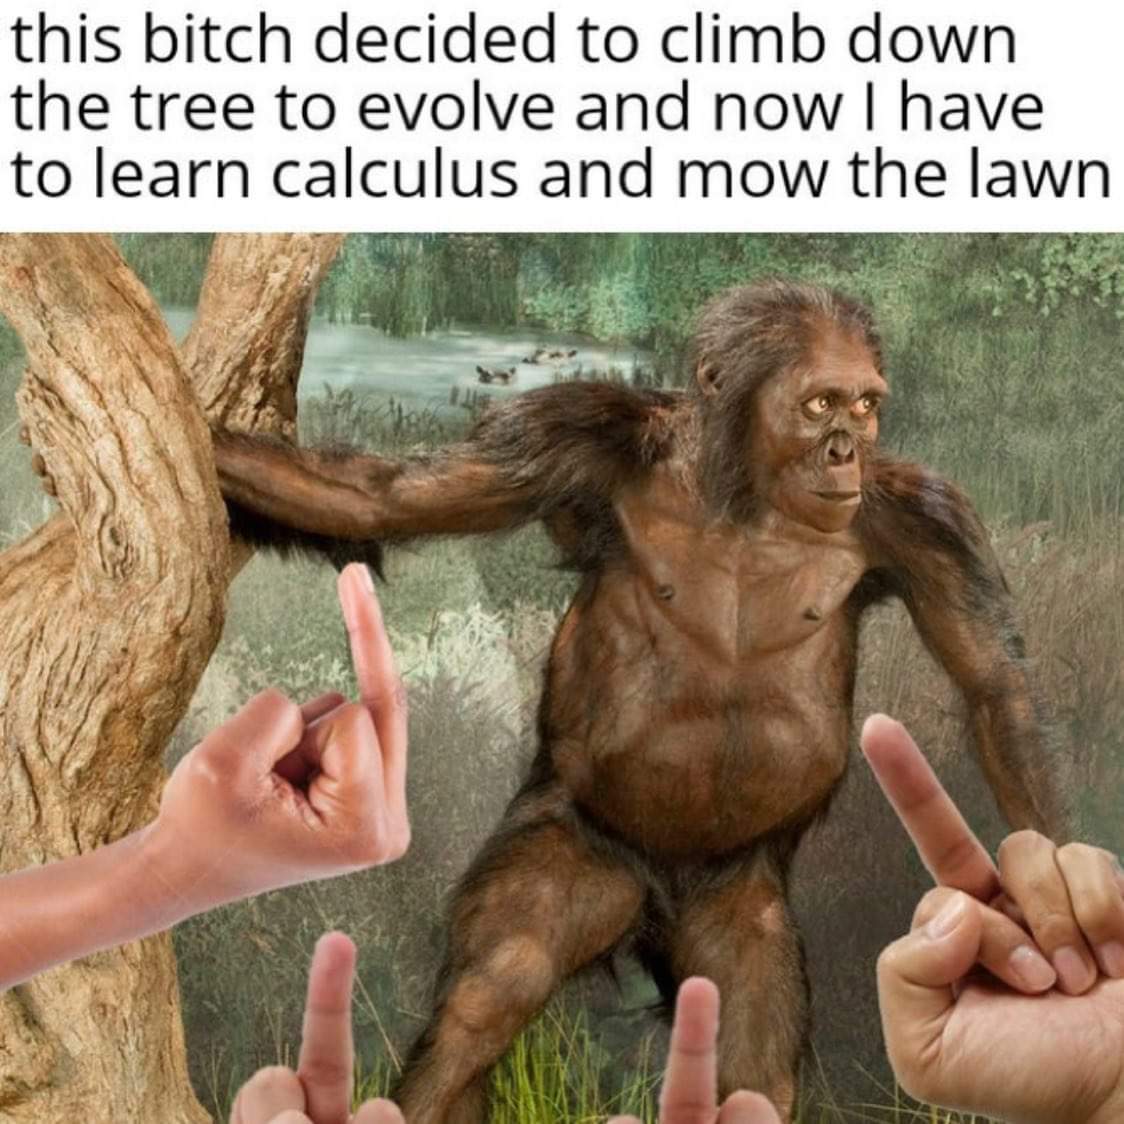 dank memes - full body australopithecus africanus - this bitch decided to climb down the tree to evolve and now I have to learn calculus and mow the lawn re